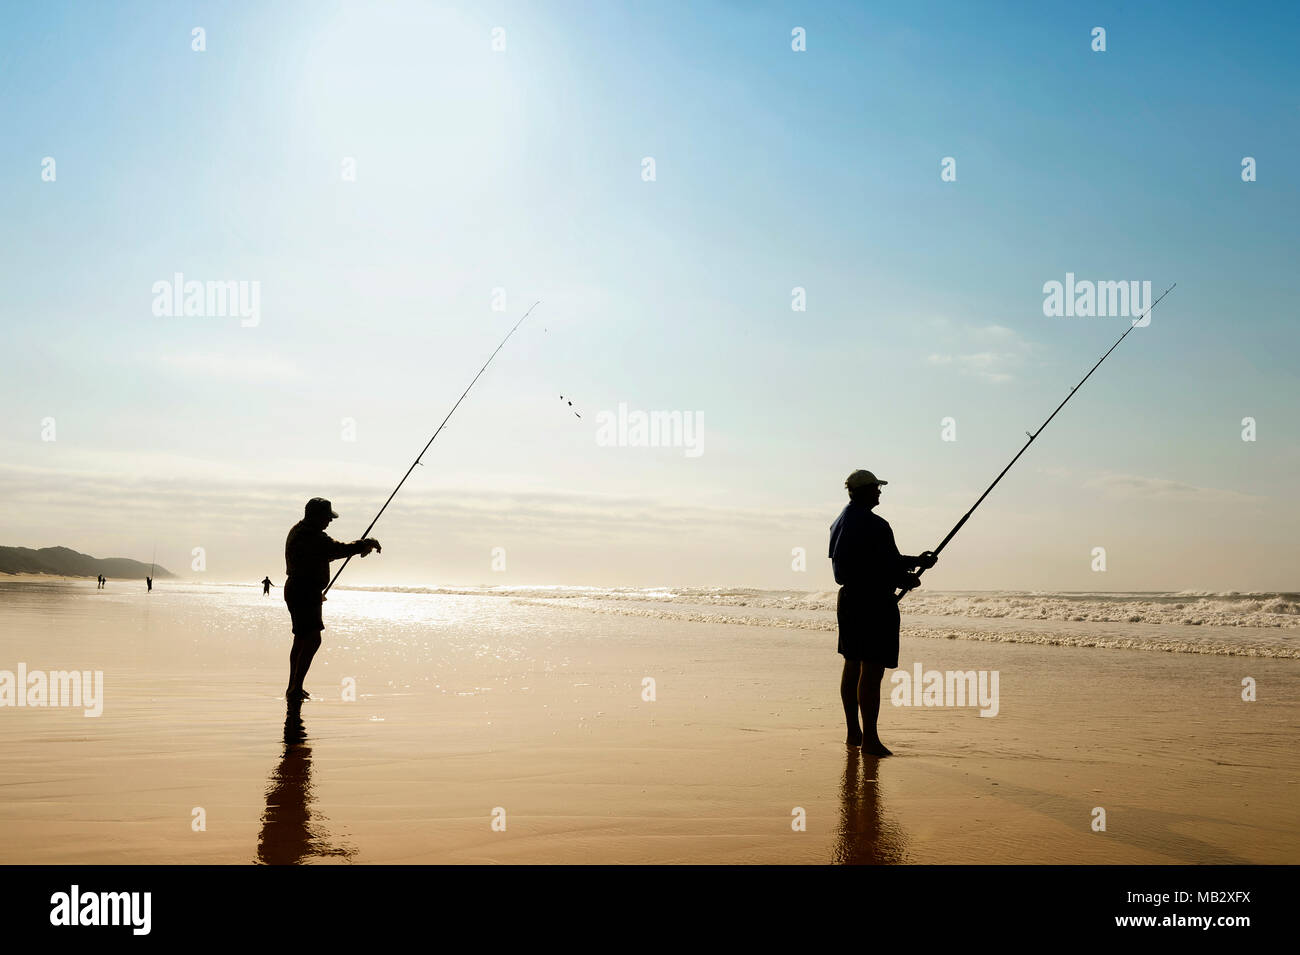 Durban, South Africa - 25. June 2017: Fisherman fishing on a beach alone in St. Lucia, Hluhluwe National Park, near Durban. Stock Photo